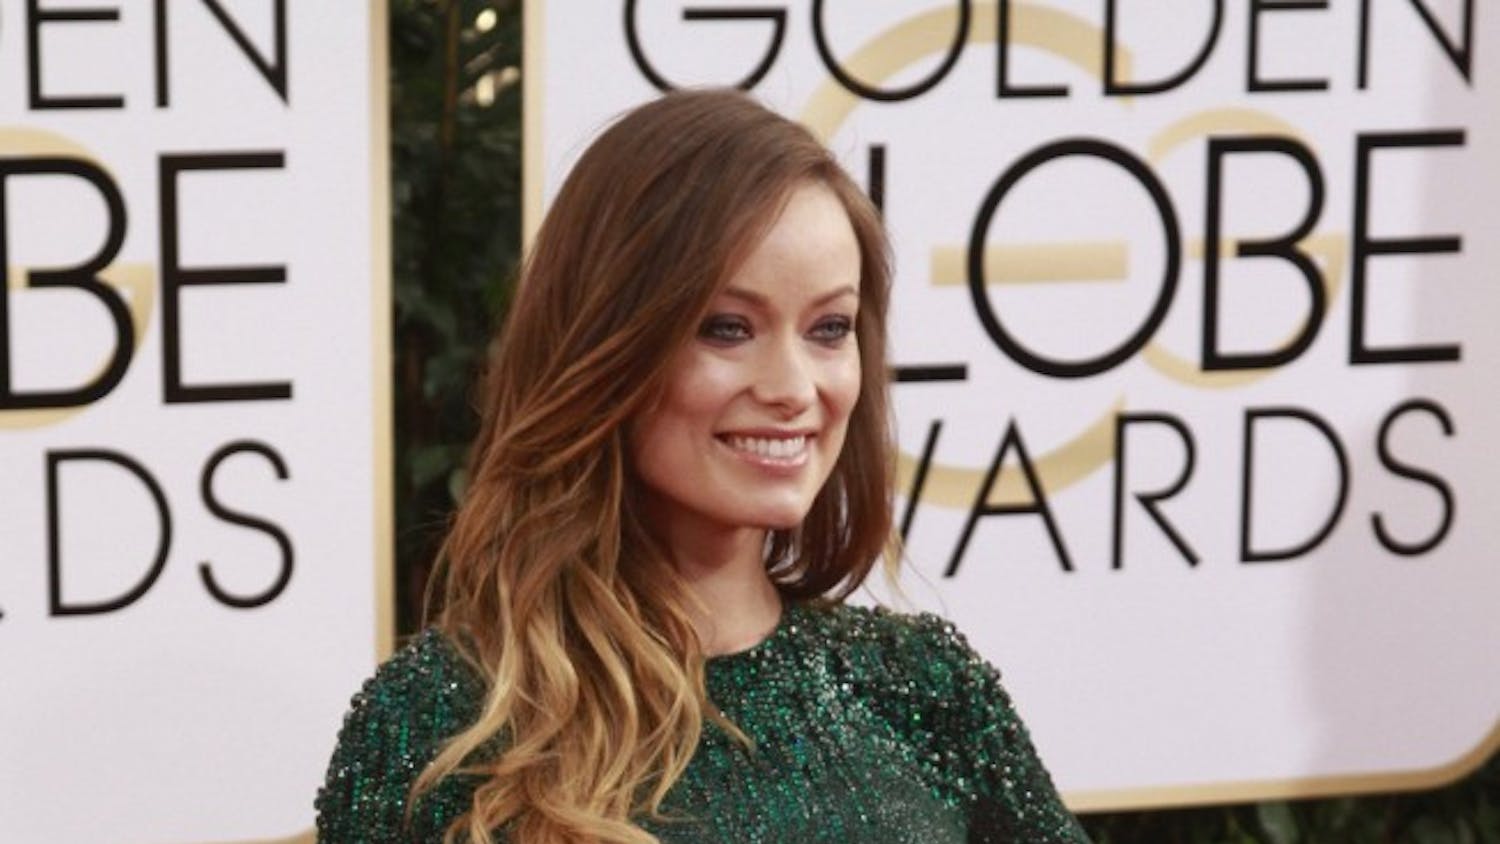 Olivia Wilde arrives for the 71st Annual Golden Globe Awards show at the Beverly Hilton Hotel on Sunday, Jan. 12, 2014, in Beverly Hills, Calif. (Kirk McKoy/Los Angeles Times/MCT)